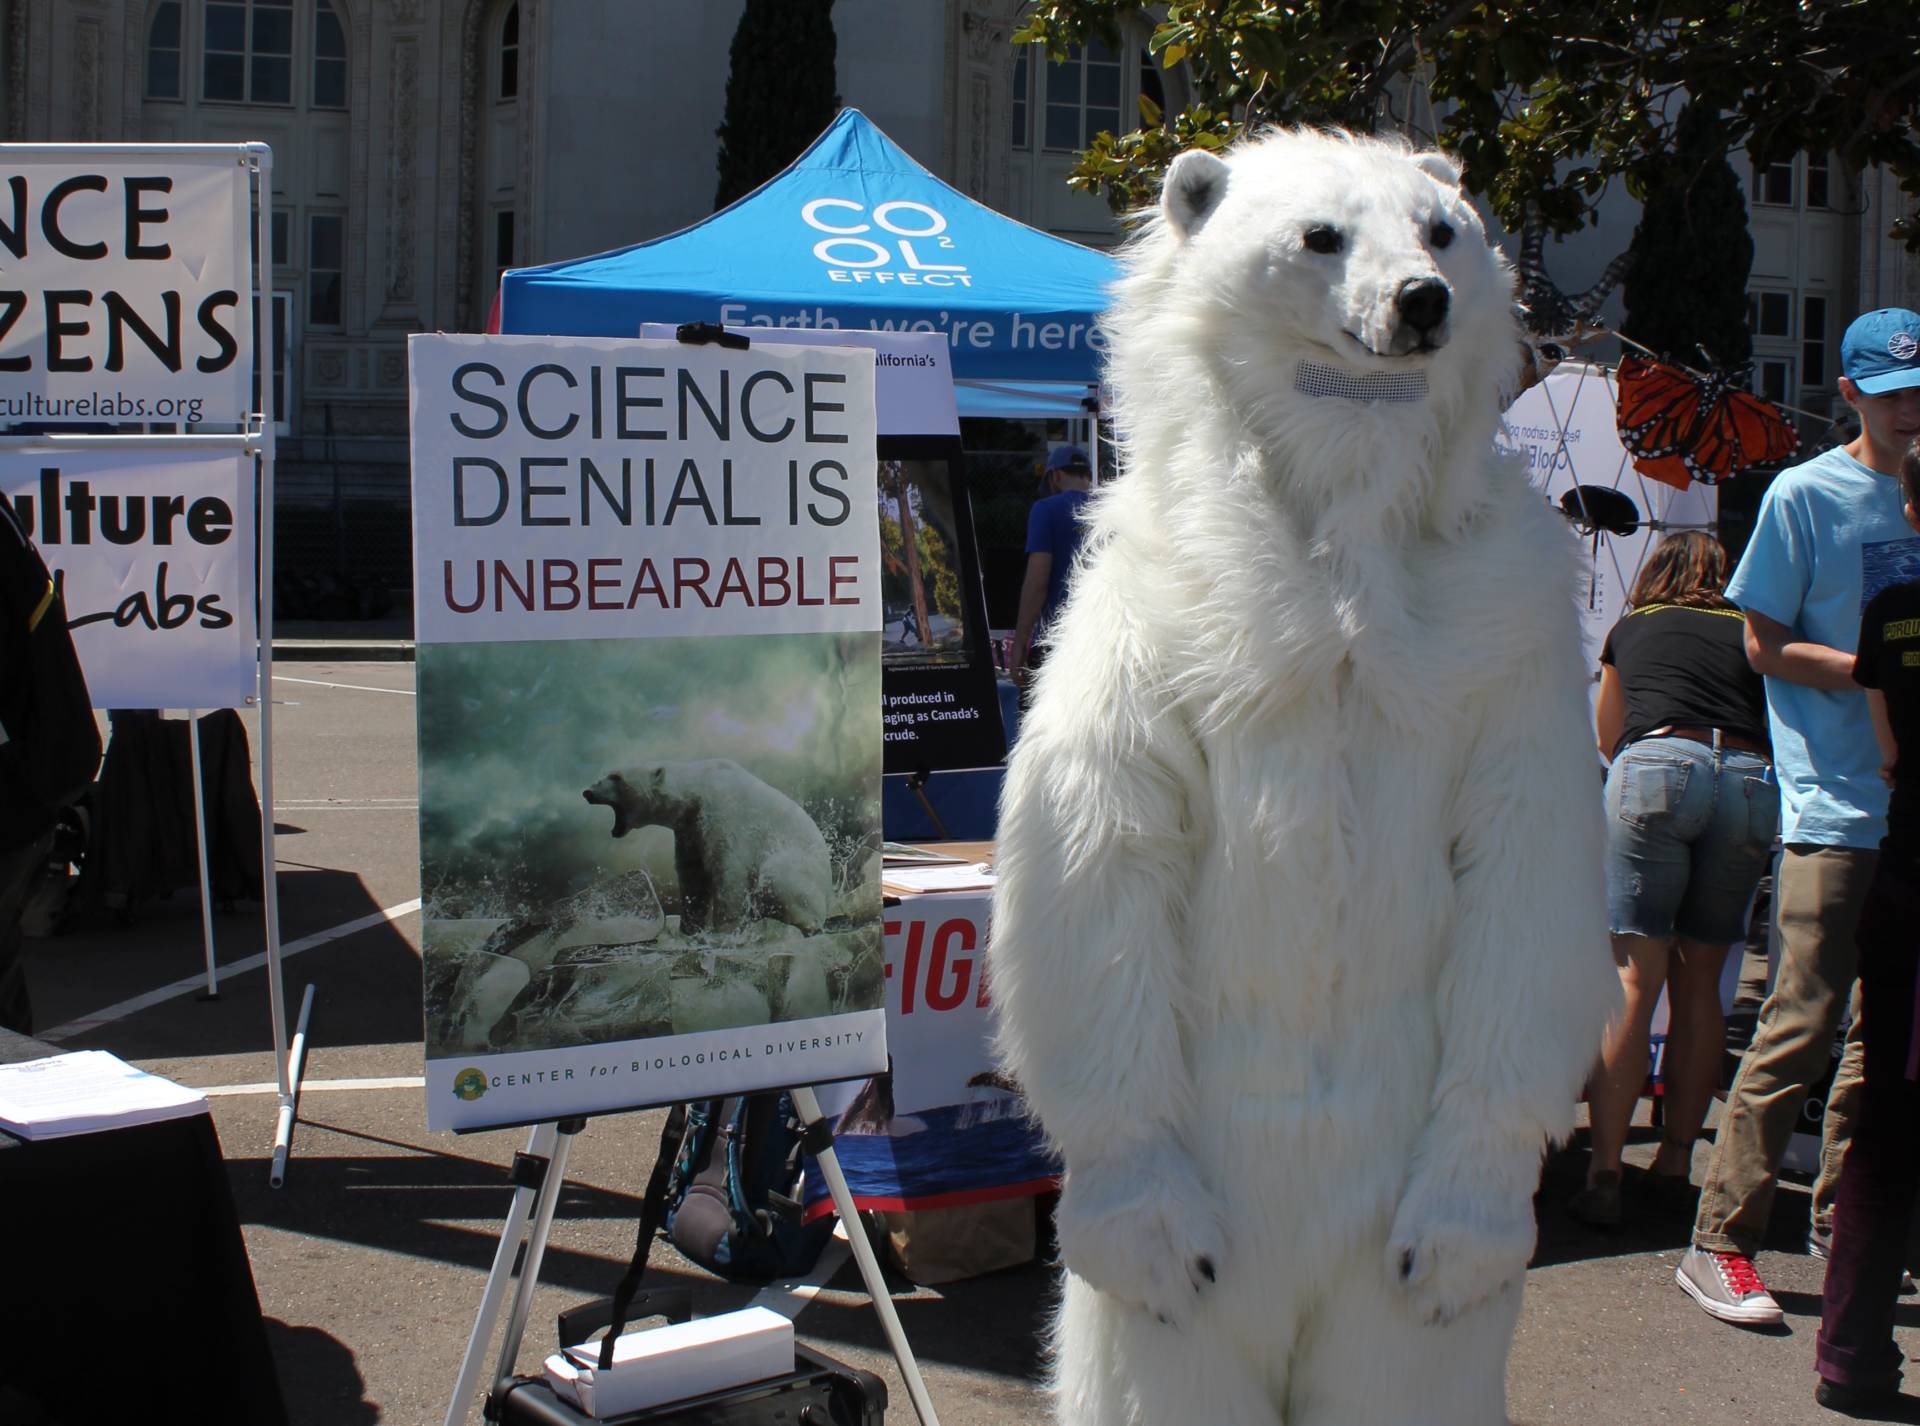 A person dressed in a polar bear outfit stands by the Center for Biological Diversity's booth at the 2018 Bay Area March for Science at Lake Merritt. Sara Hossaini/KQED